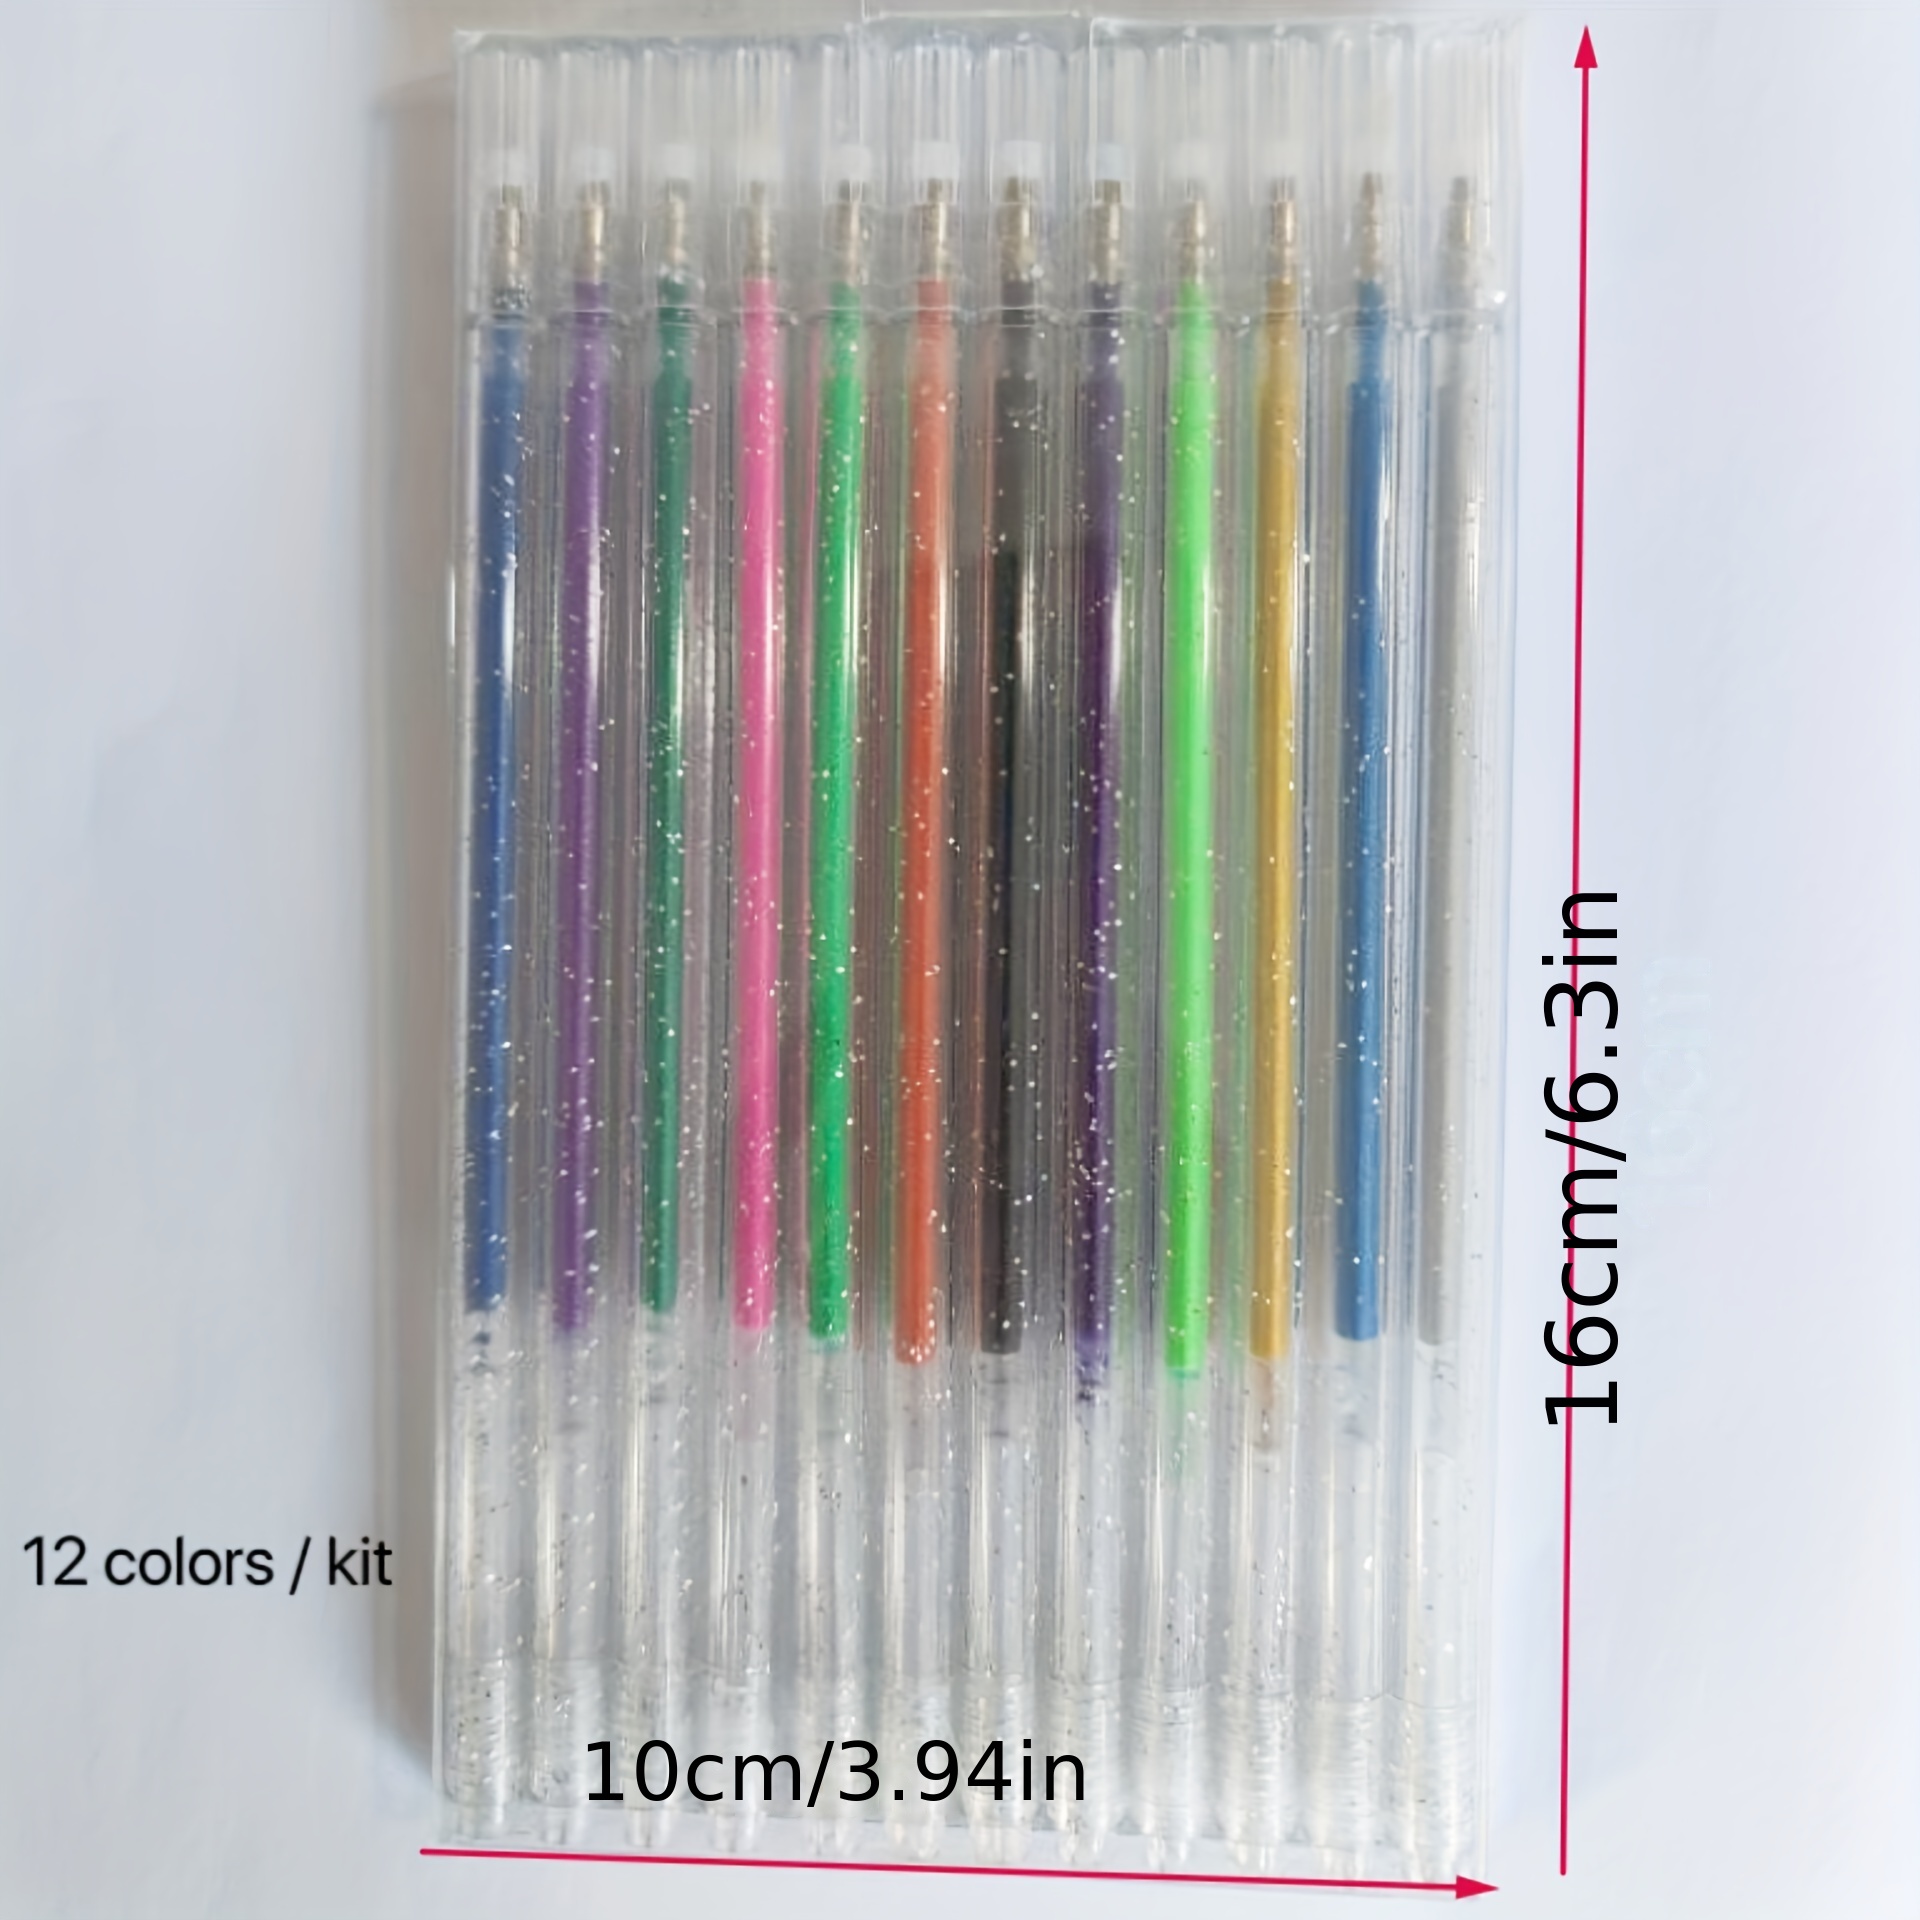 12 Glitter Gel Pens - Bright Stripes – The Red Balloon Toy Store